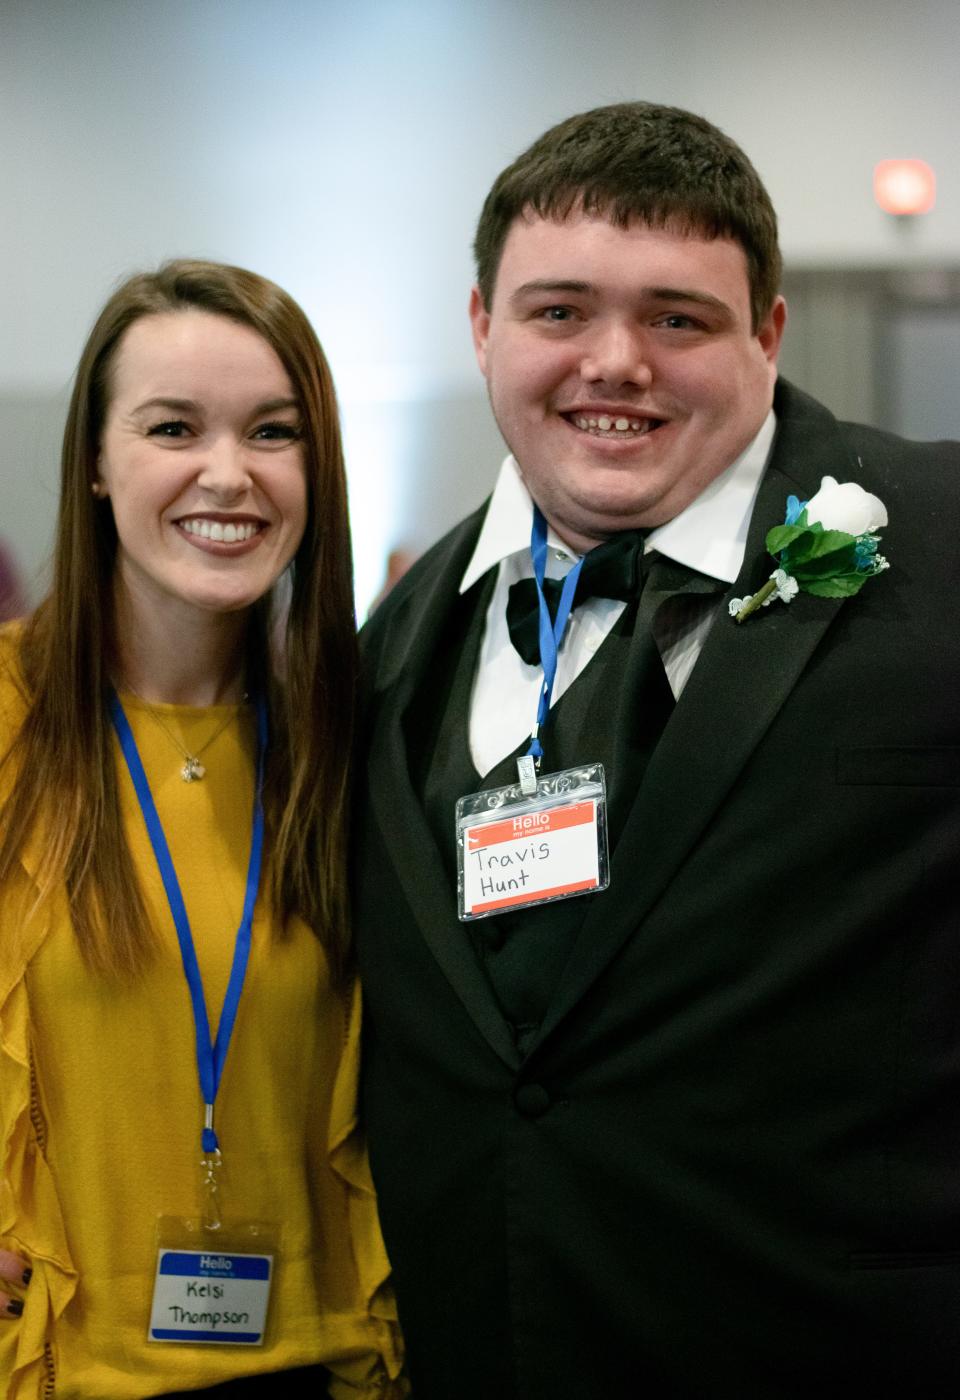 Kelsi Thompson and Travis Hunt are ready to dance the night away at the 2020 Night to Shine event. Each guest has a "buddy" with them the entire evening. The buddies have to take a special training class required by the Tim Tebow Foundation for the Night to Shine event.